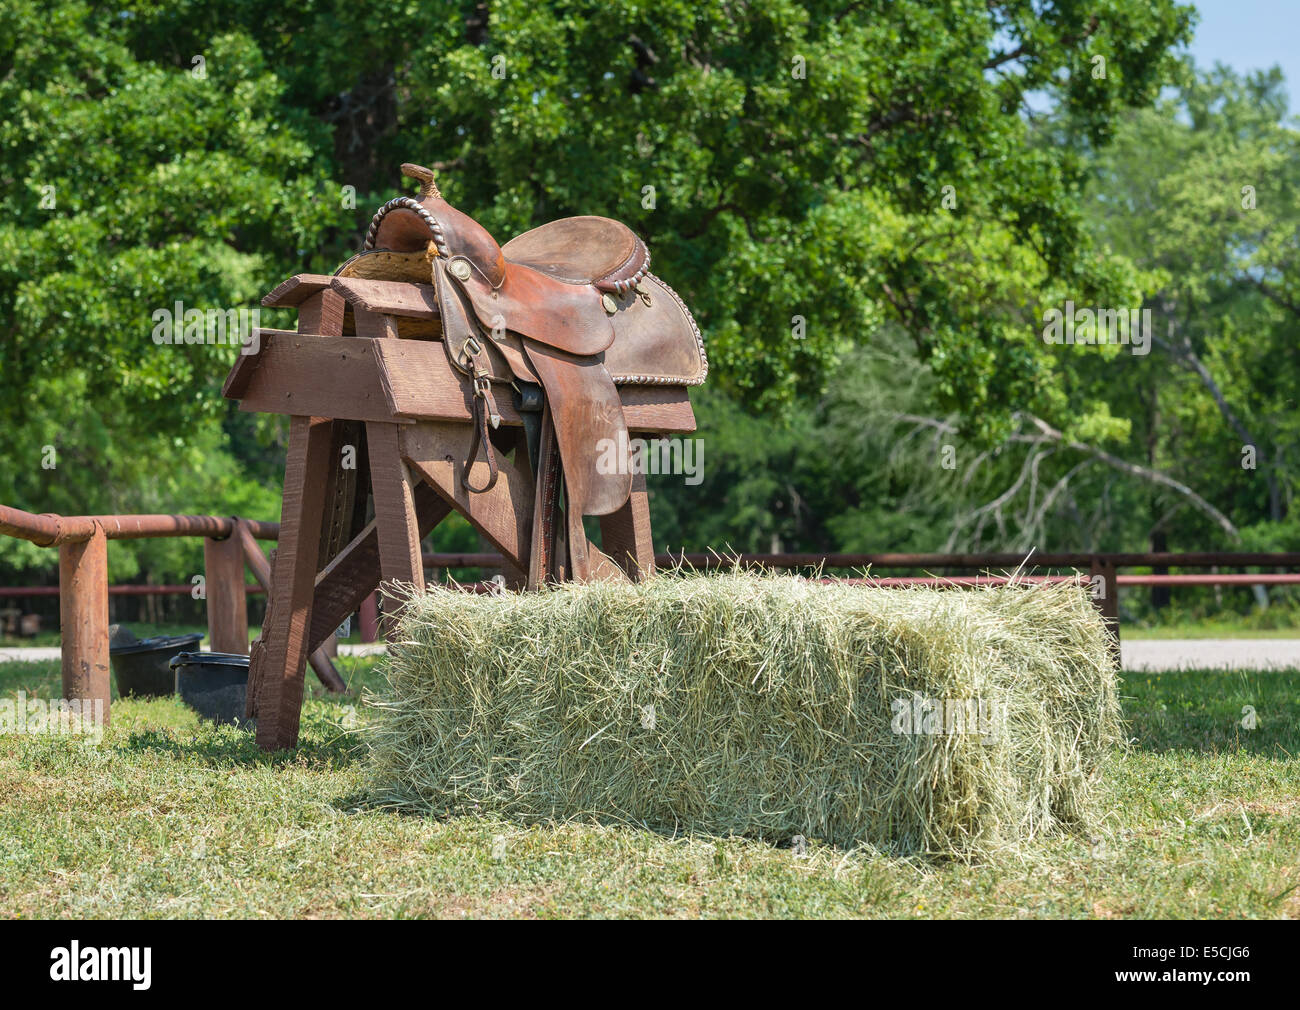 Leather horse saddle displayed on a wooden stand and a hay bale Stock Photo